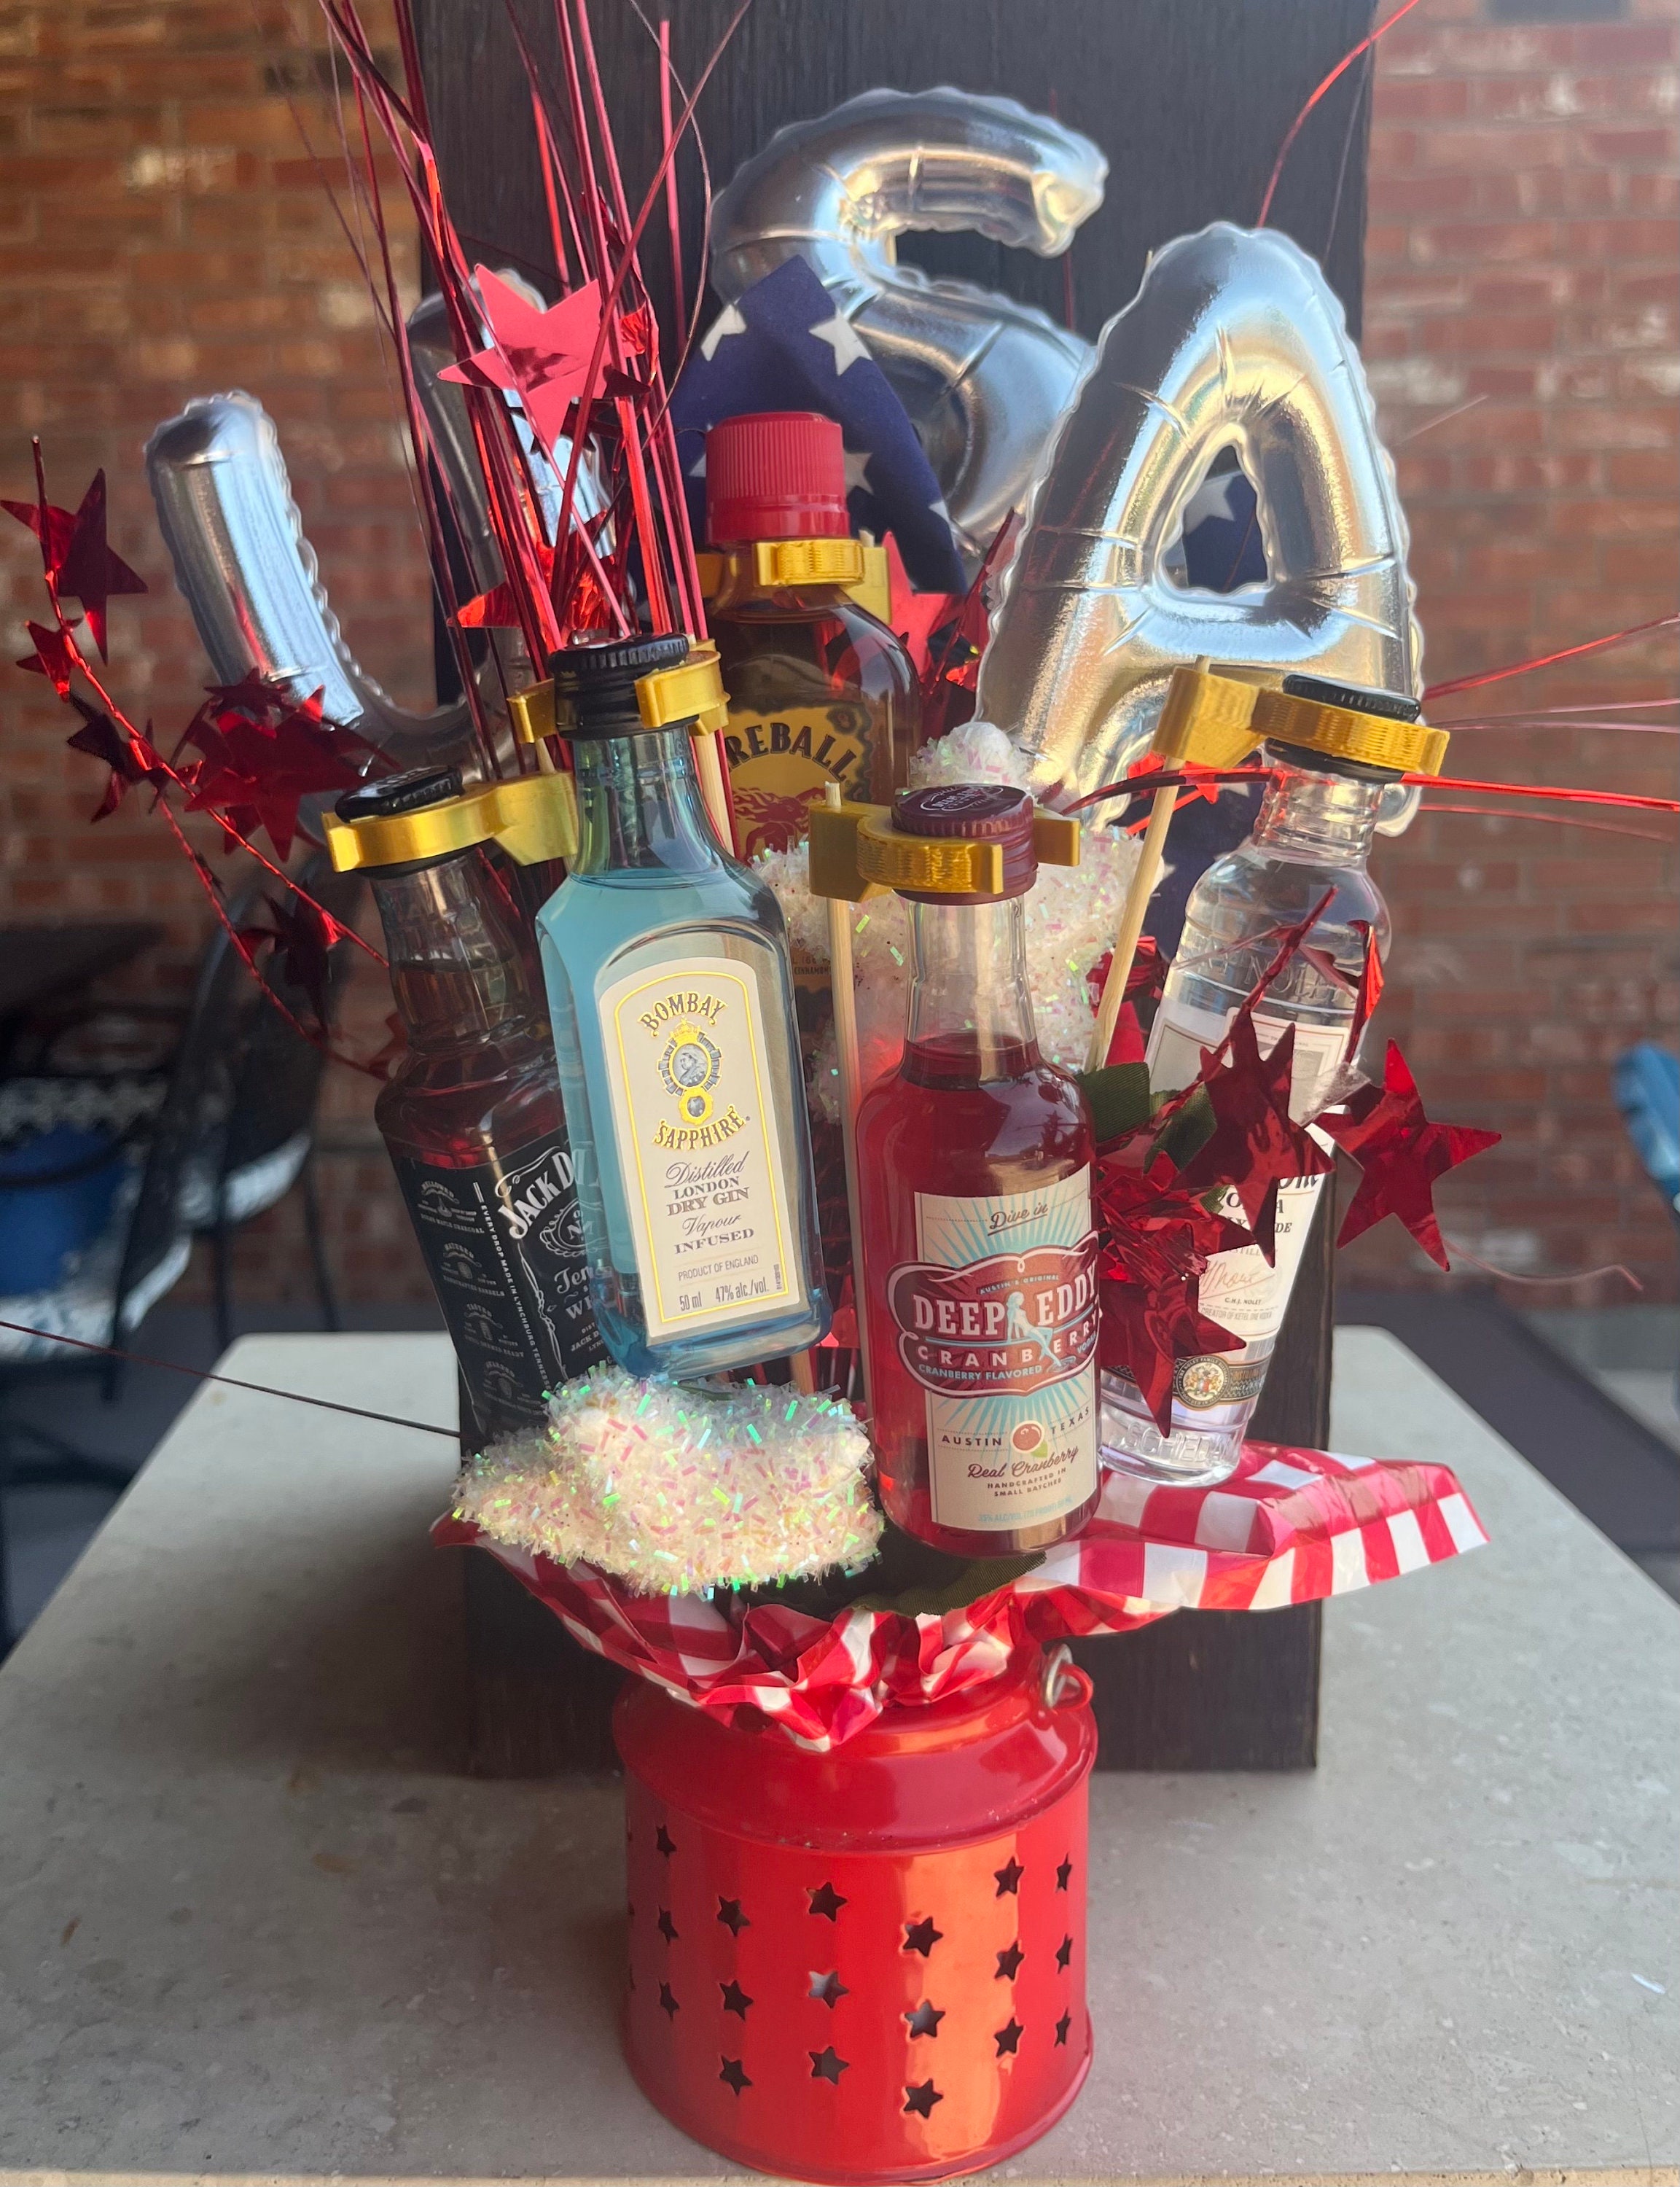 Forget Flowers—Give Your Sweetheart a Bouquet of Mini Alcohol